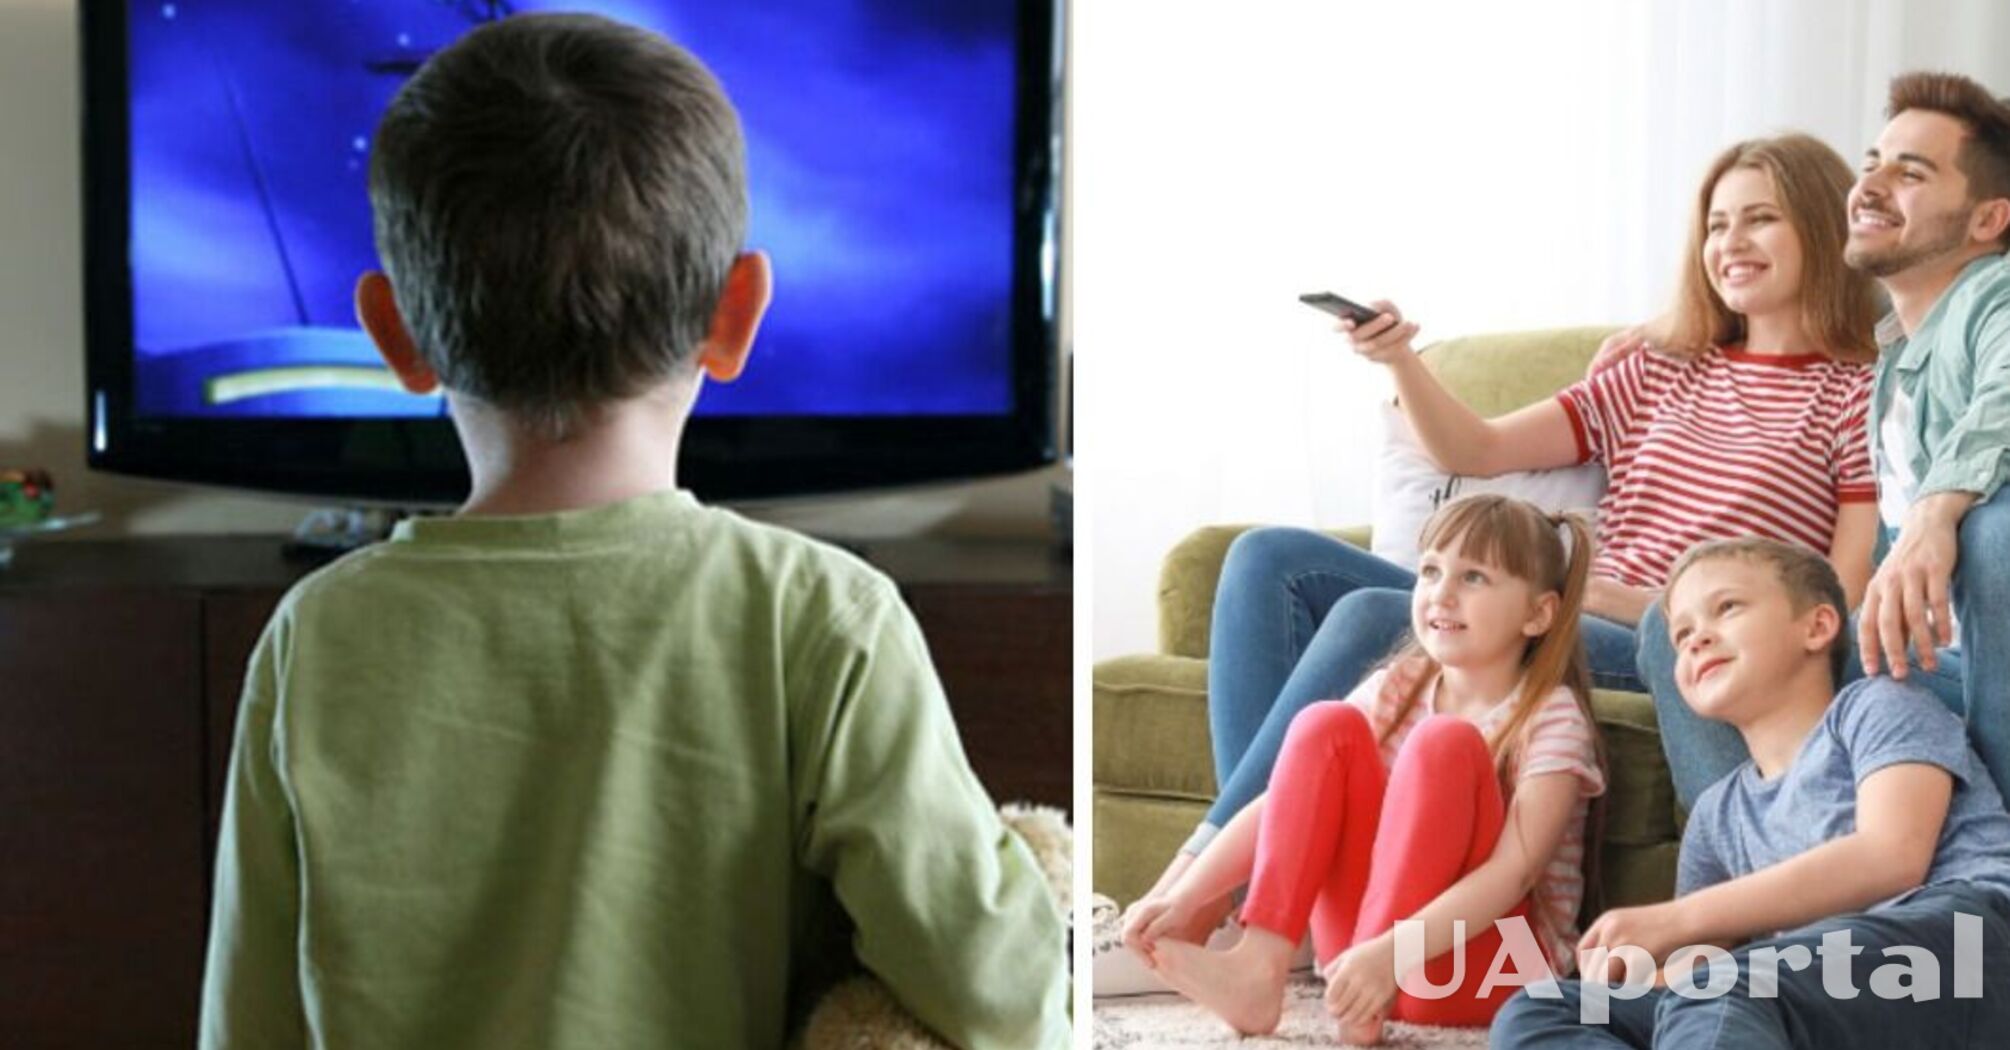 How to watch cartoons without harming your child